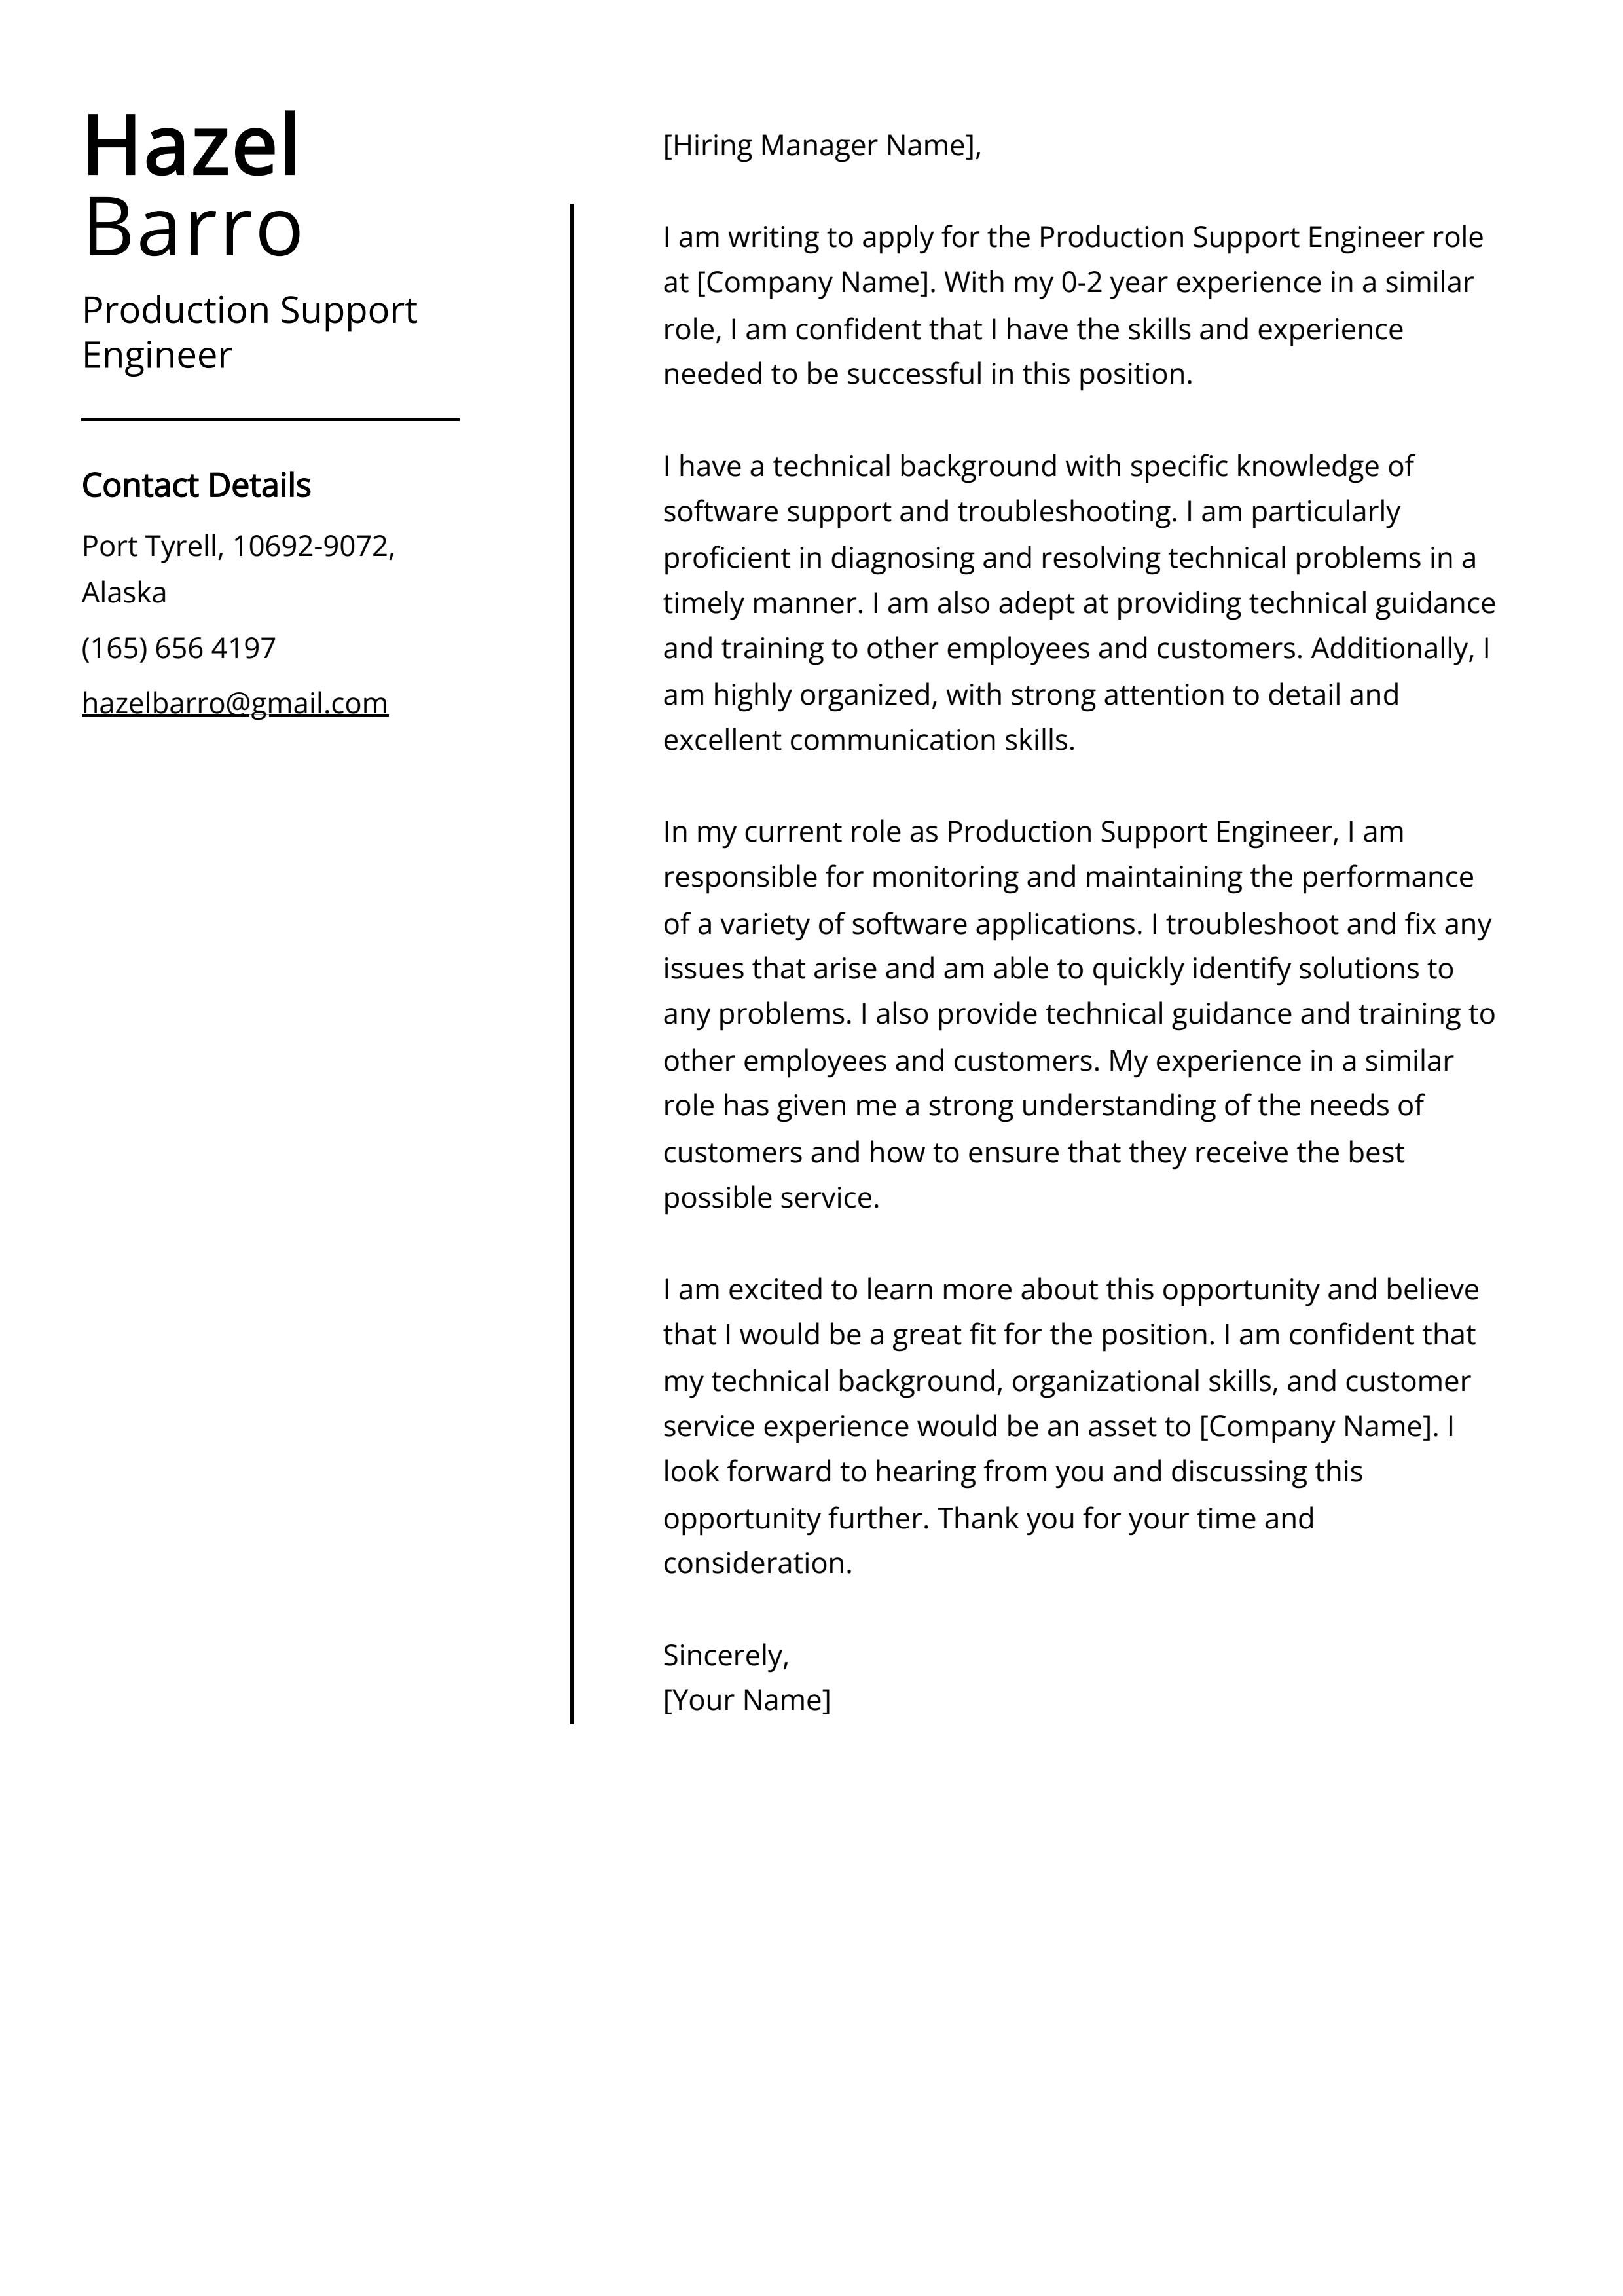 Production Support Engineer Cover Letter Example